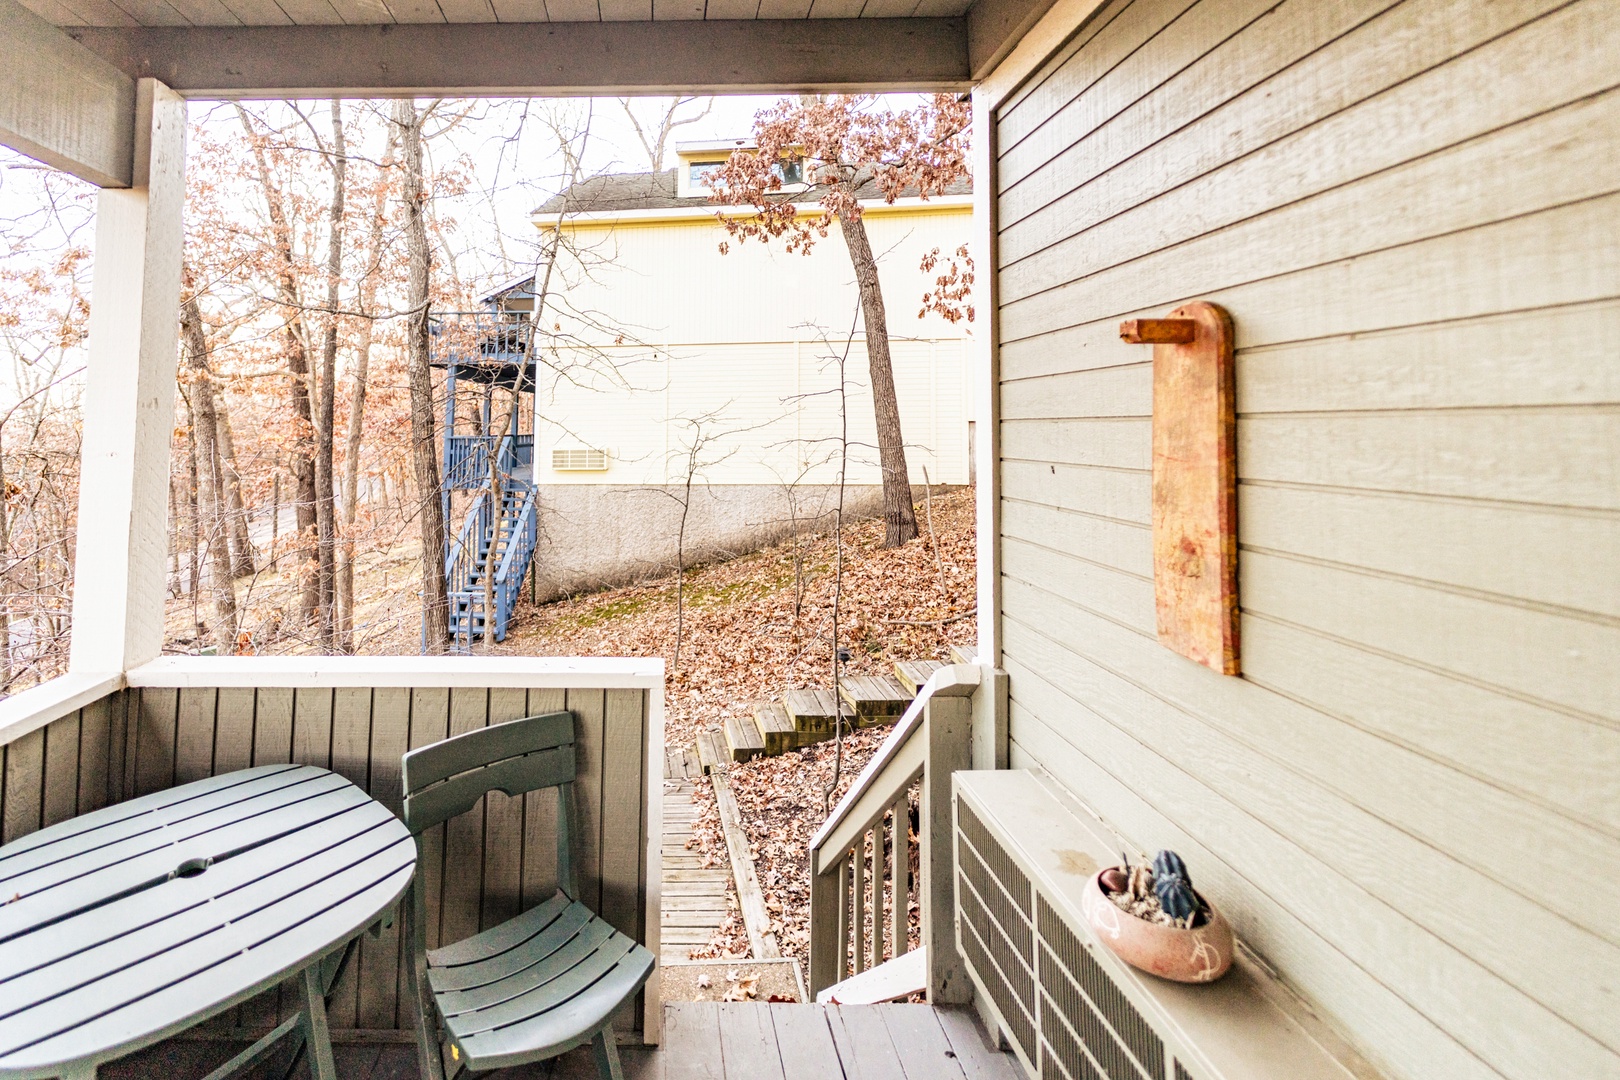 Relax & sway as you take in the view on the lower-level back deck